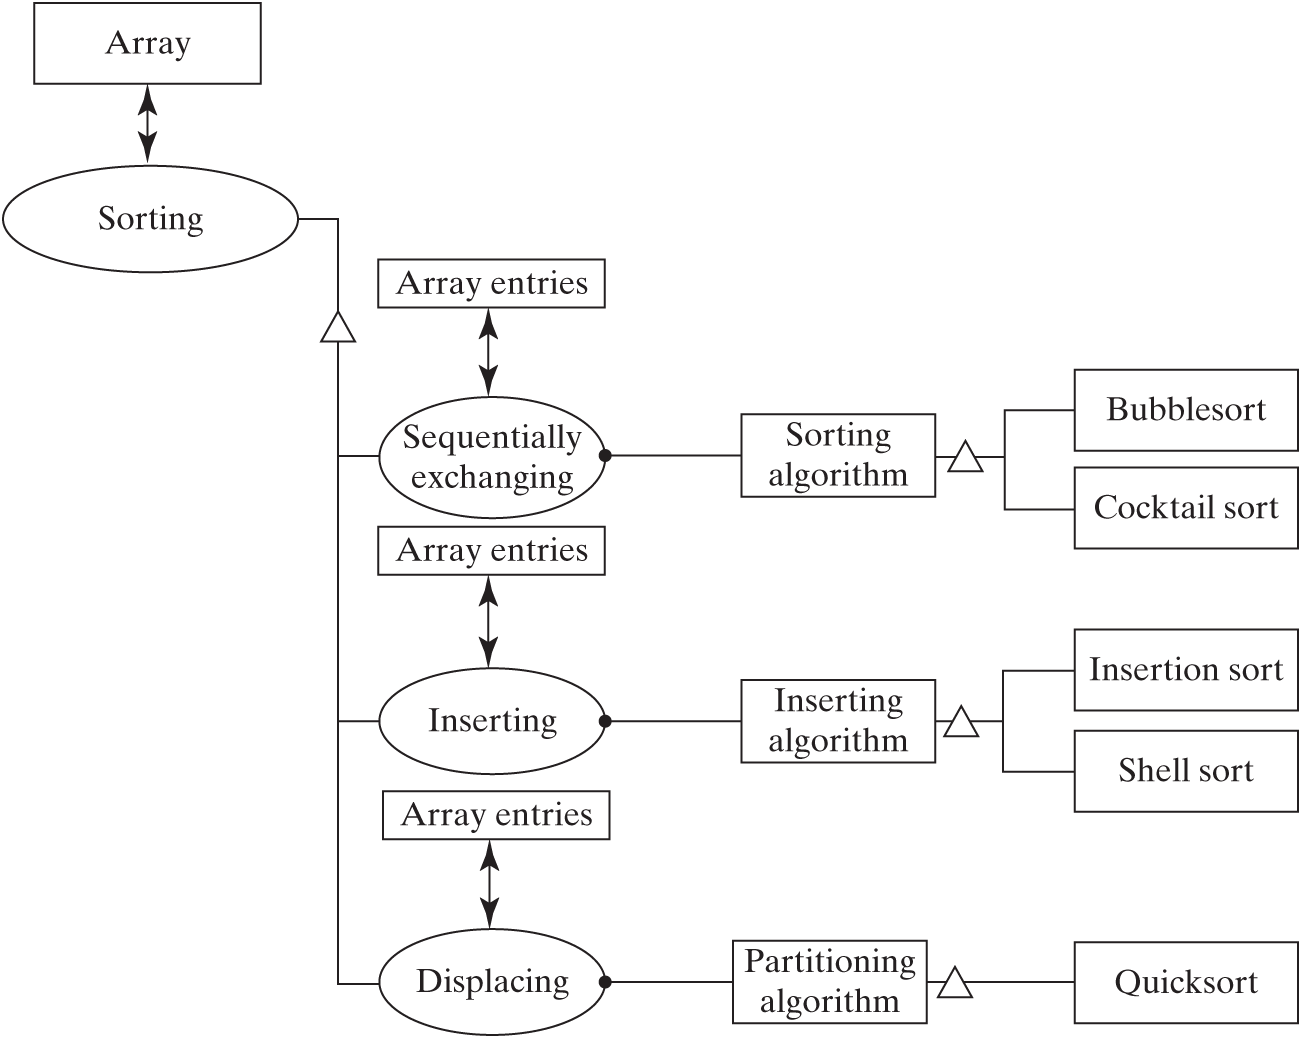 A flow chart of a sorting system.